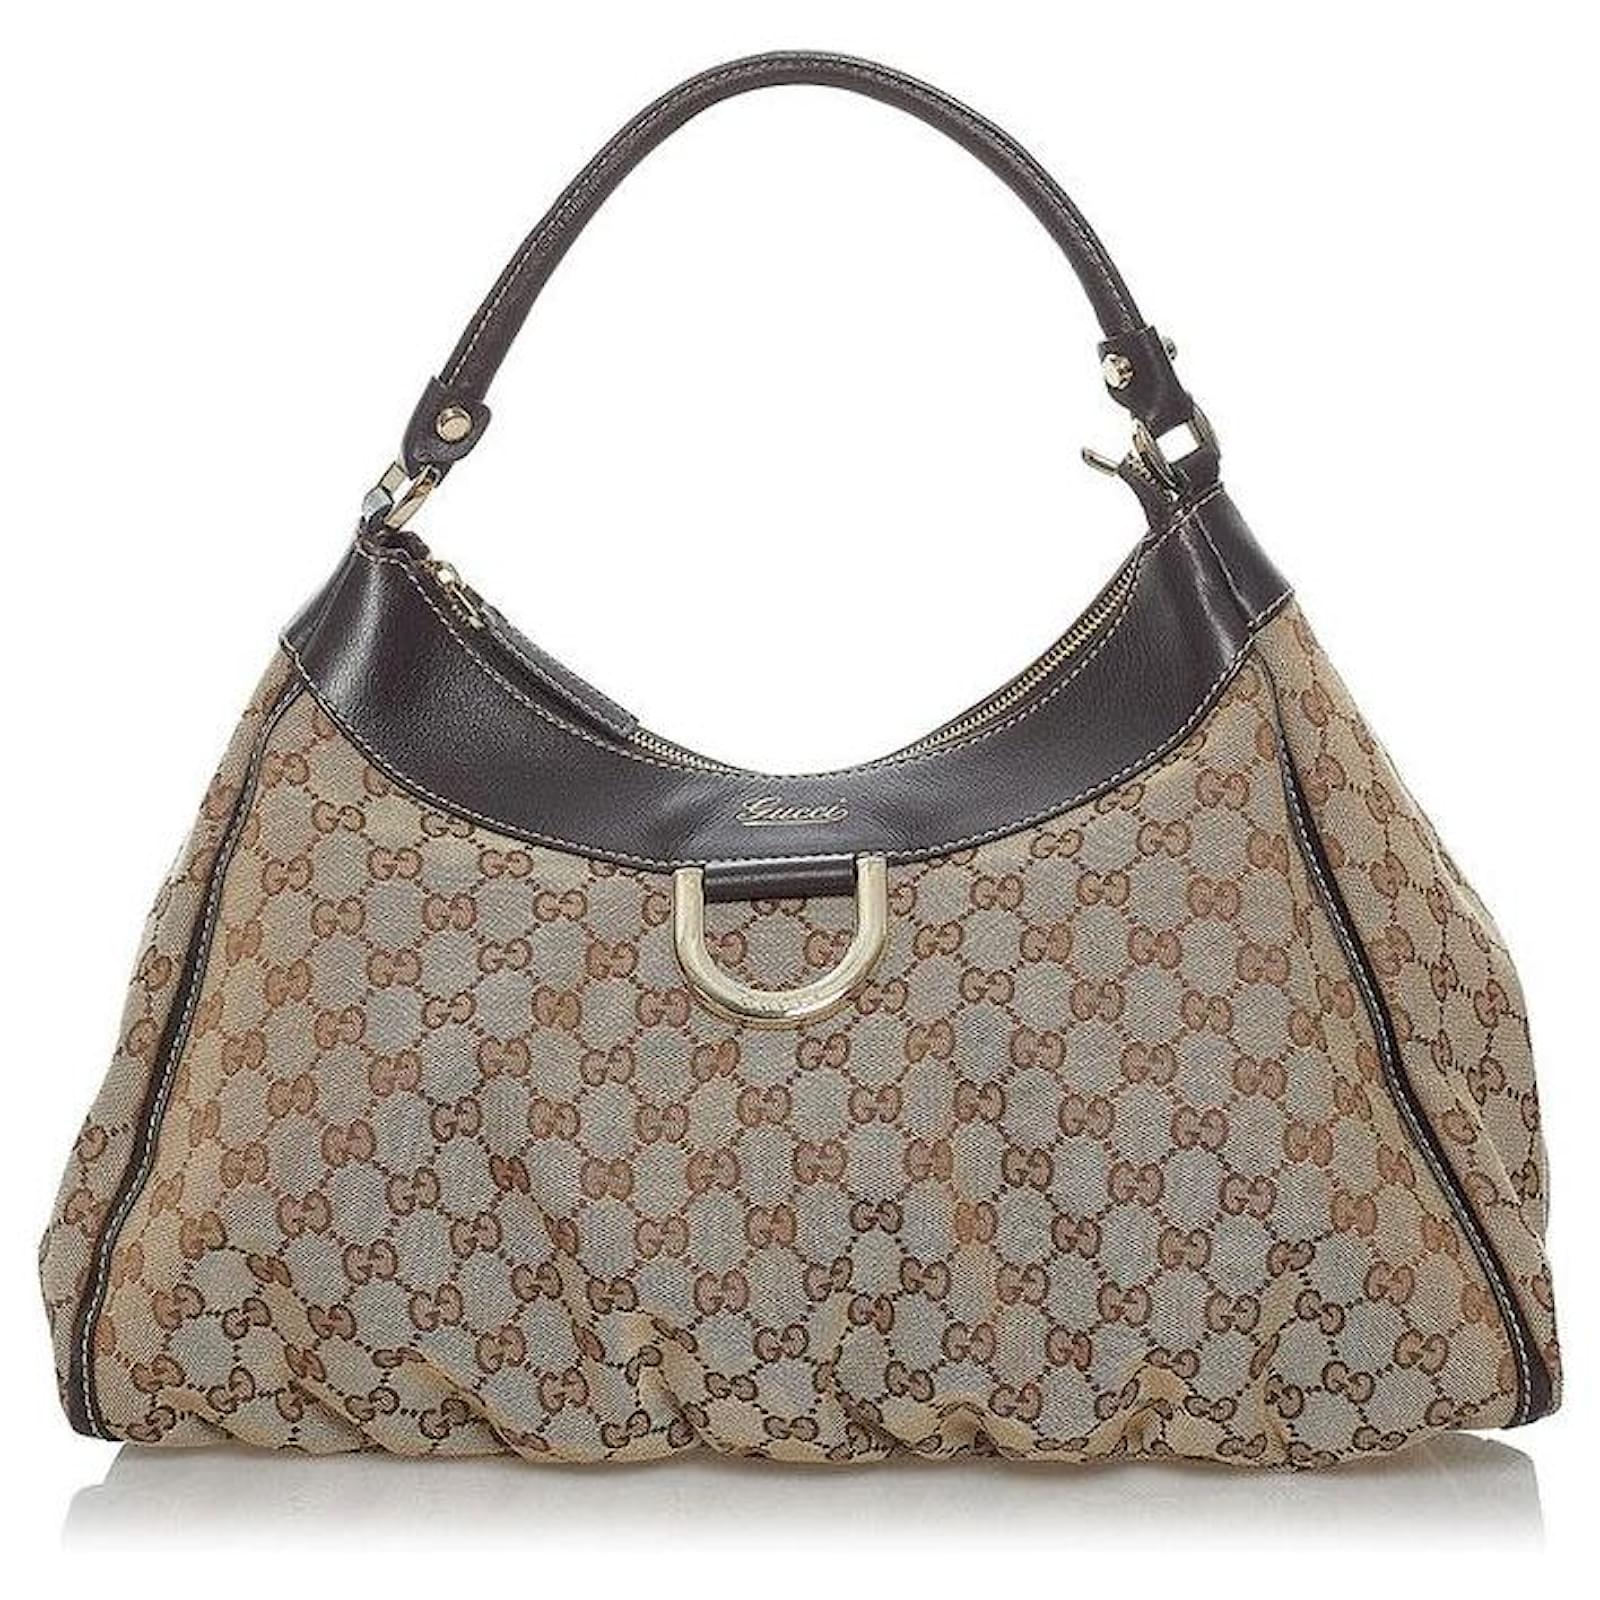 Gucci GG Canvas D-Ring Hobo Bag on SALE